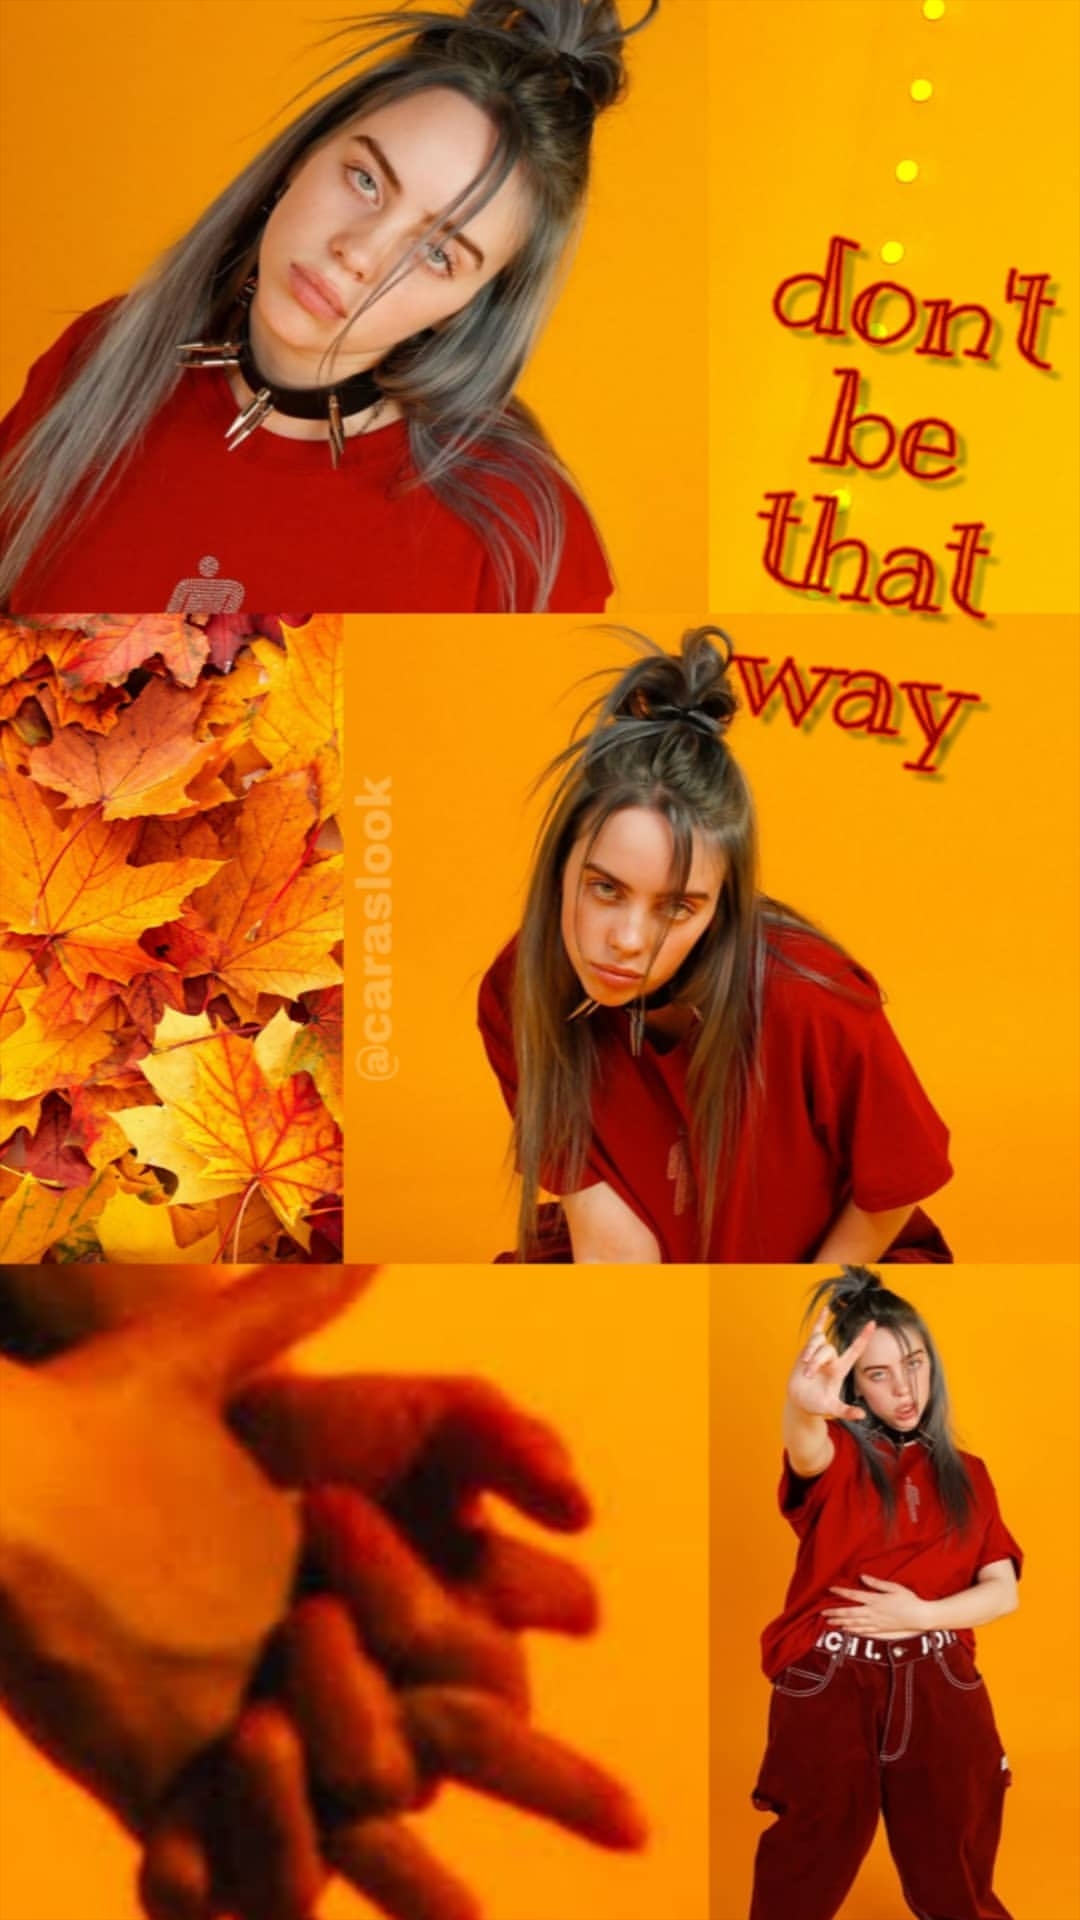 Billie Eilish Aesthetic Pictures Wallpapers